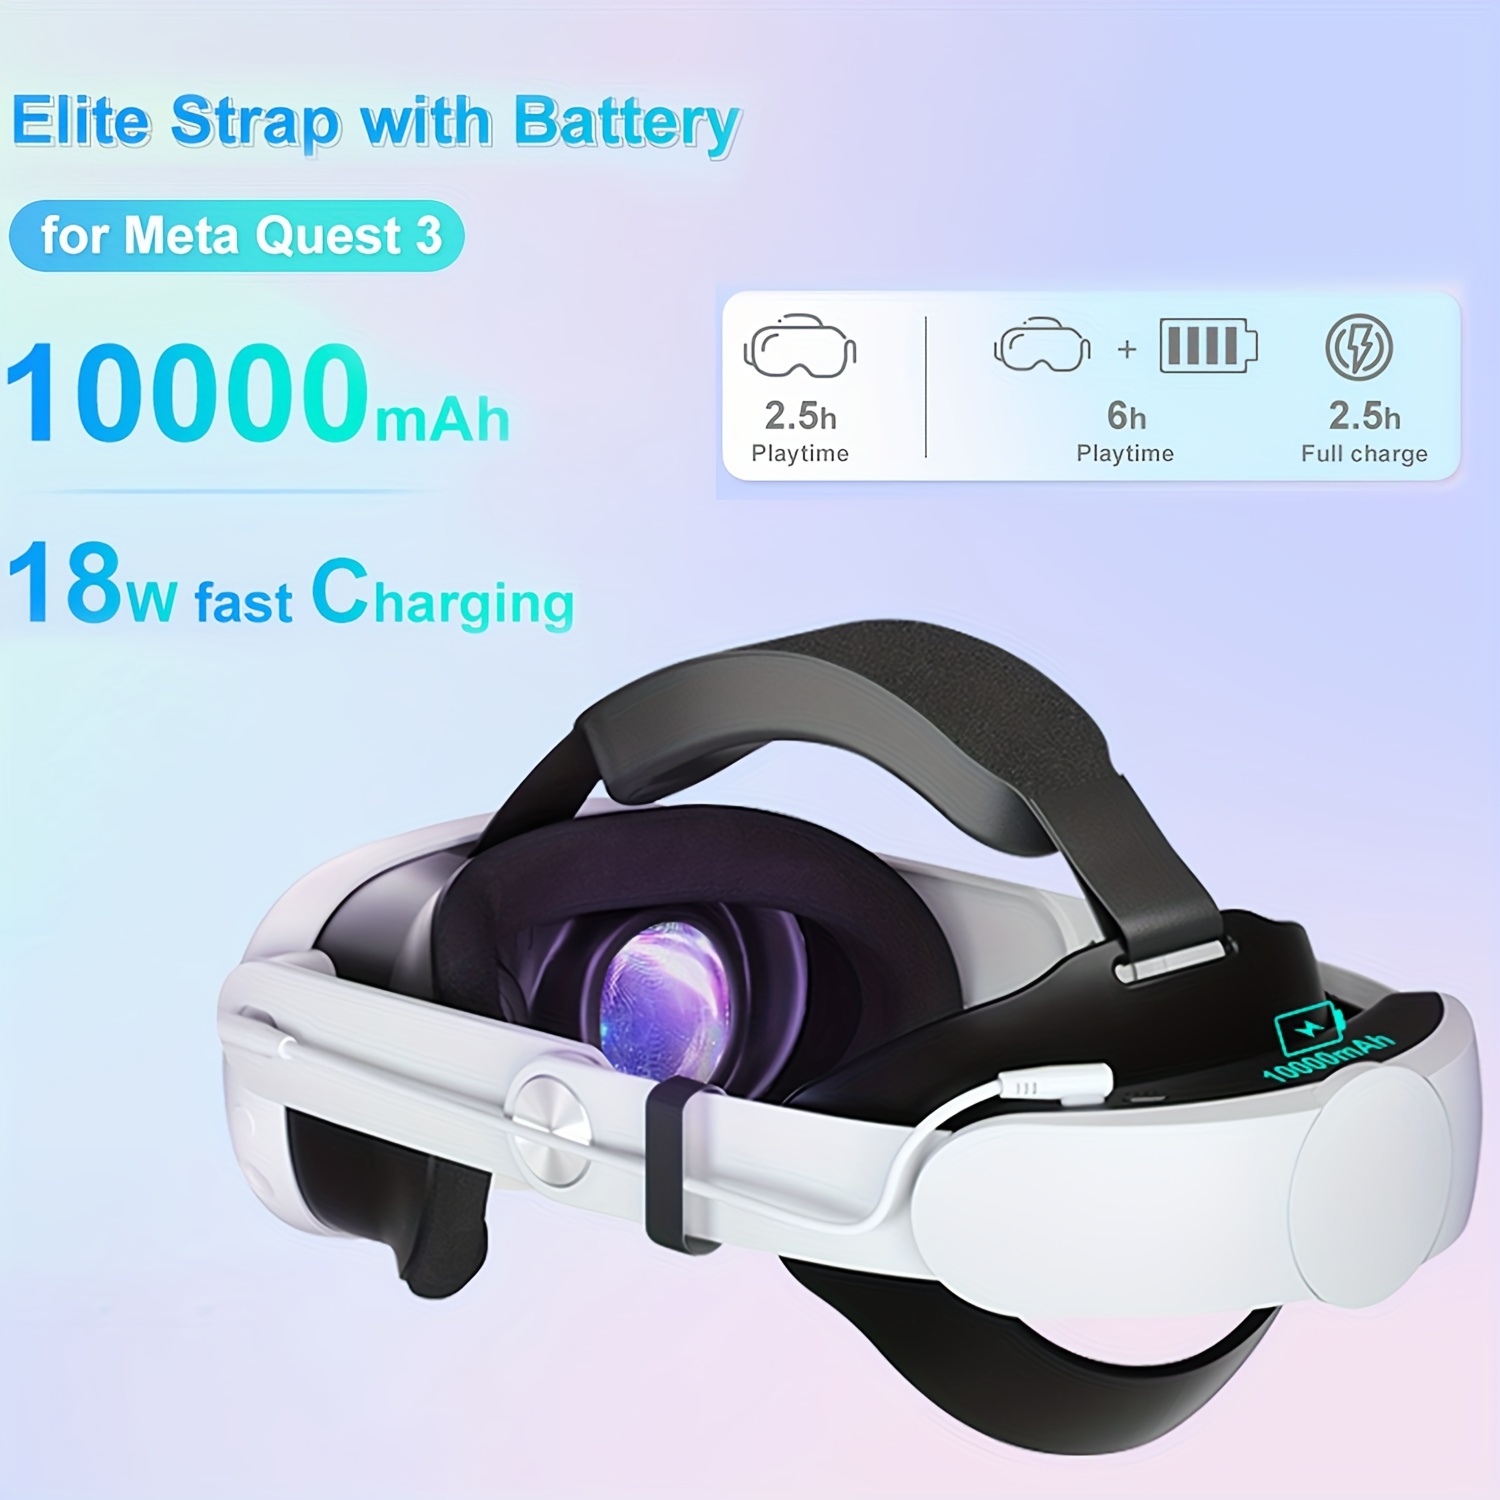 Battery Head Strap 7500mAh for Meta Quest 3/Quest 2,Elite Strap with  Battery Extend Playtime for Oculus Quest 3/2, Double Knob Adjustable Head  Strap